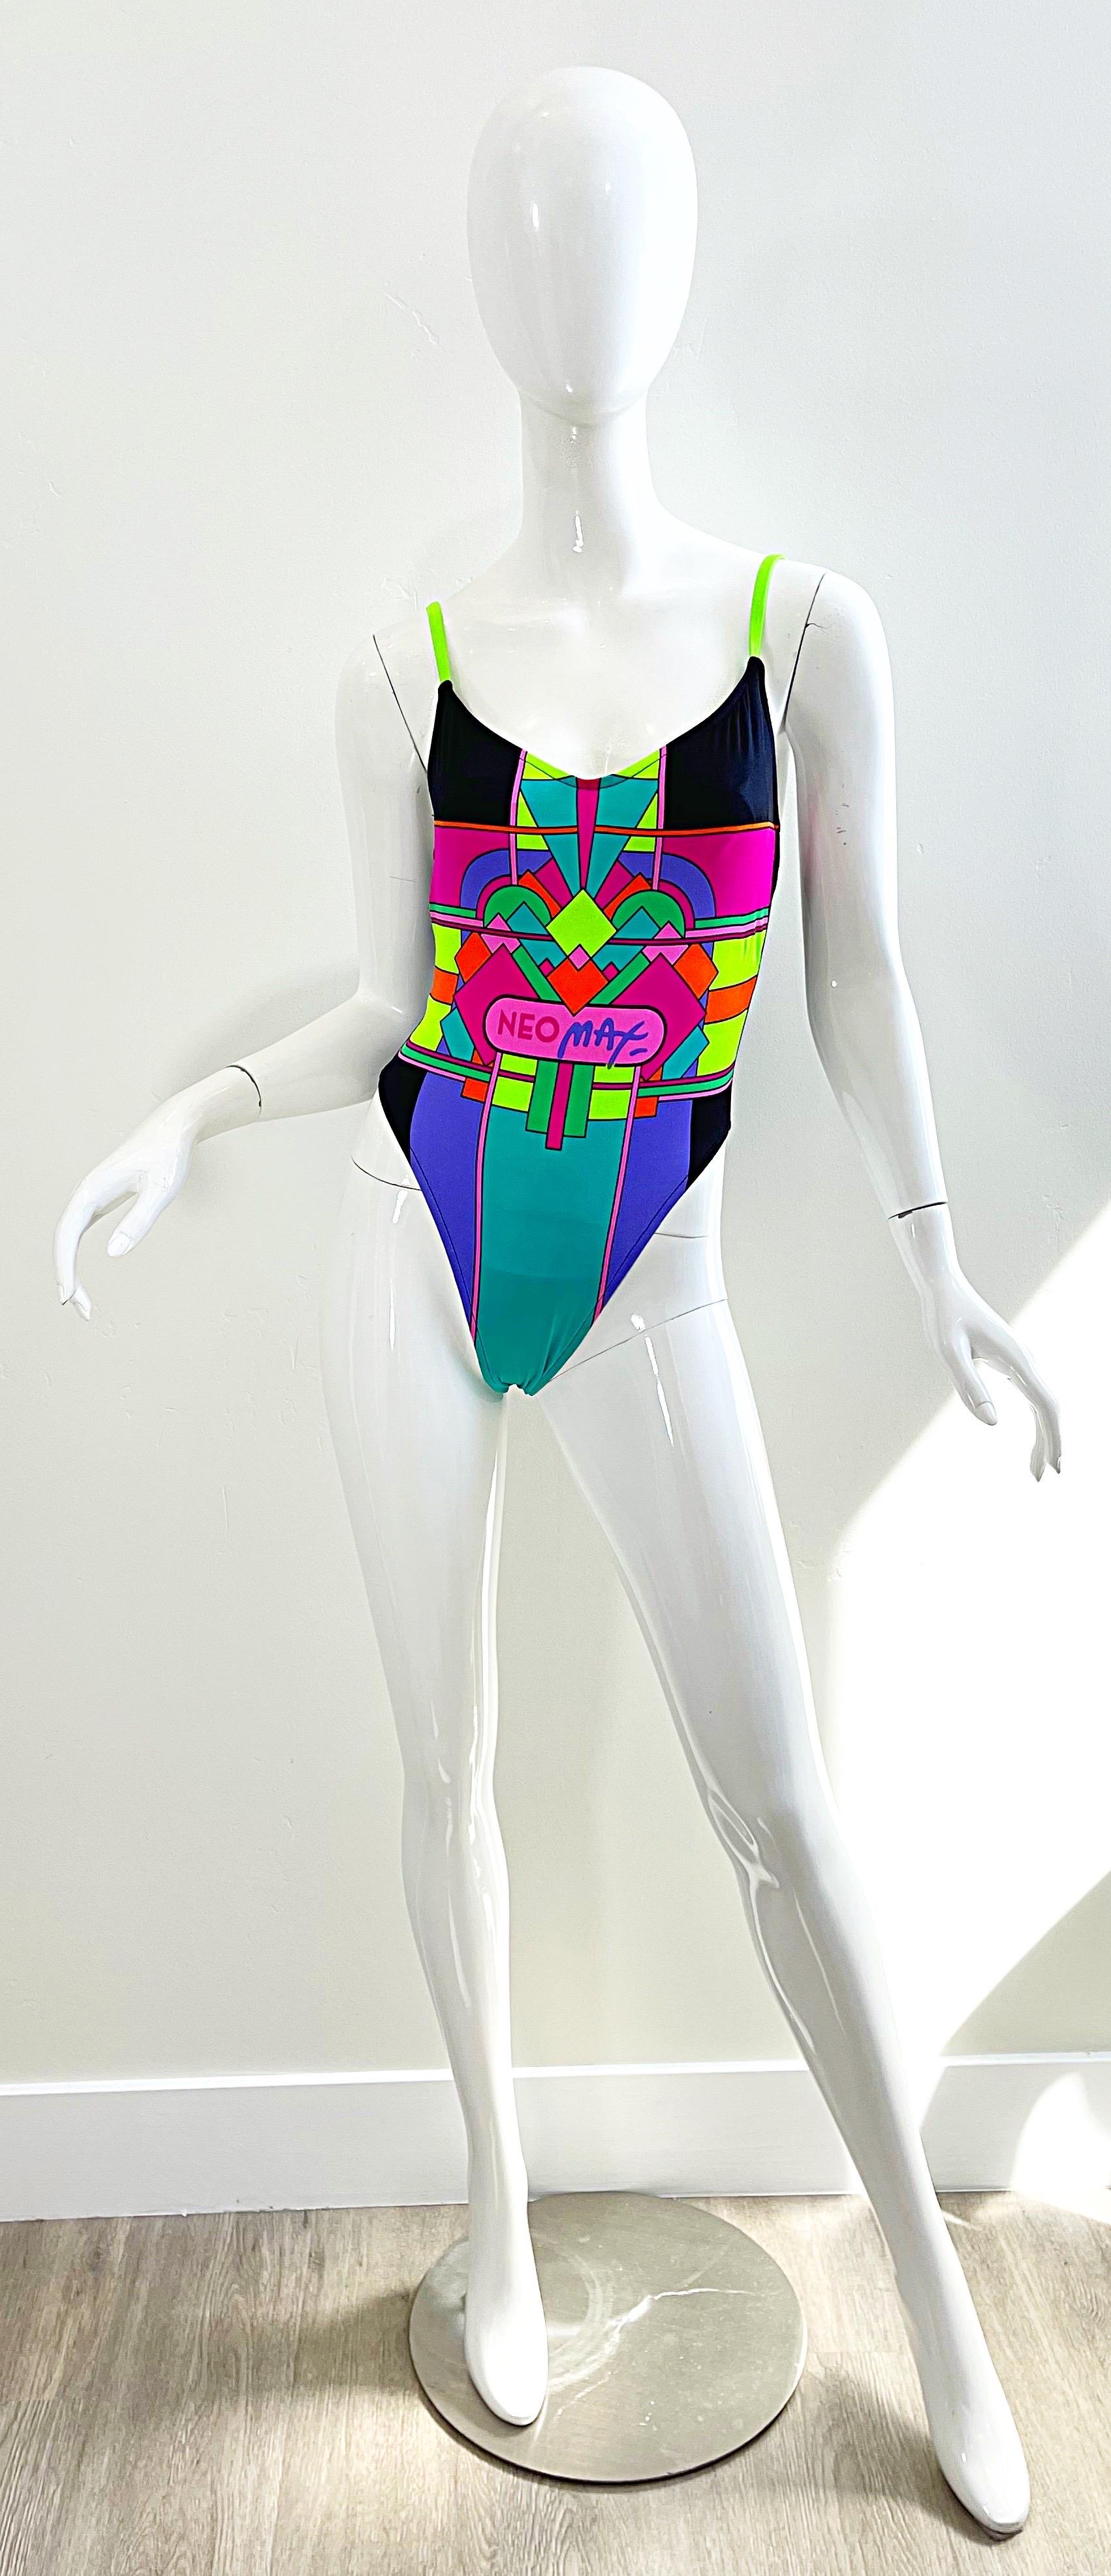 NWT 1980s Peter Max Neomax Neon Abstract Art Print One Piece Swimsuit Bodysuit For Sale 6